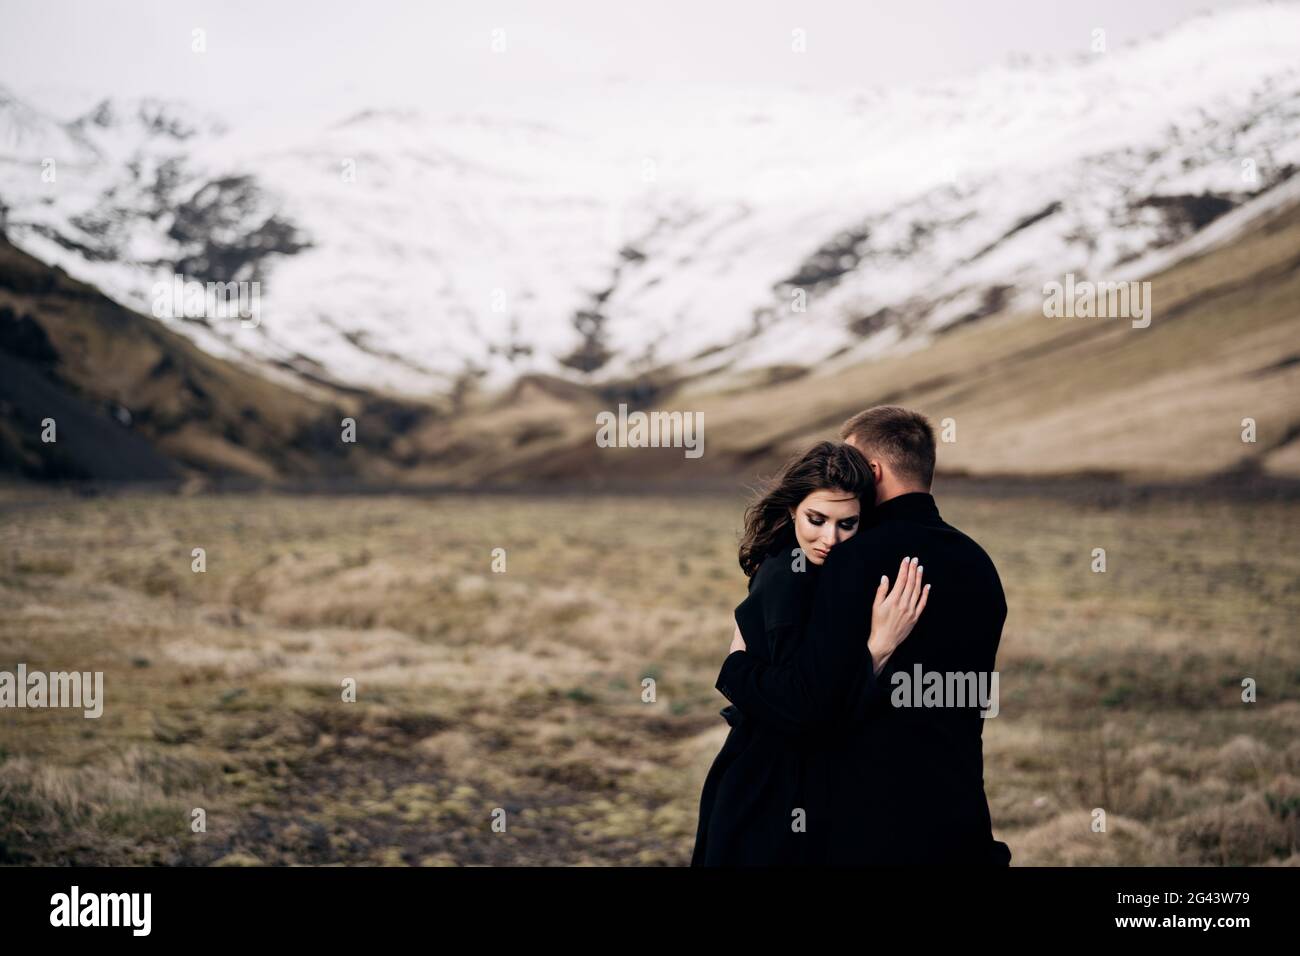 Destination Iceland wedding. Wedding couple on a background of snowy mountains. The bride and groom in black coats are hugging i Stock Photo